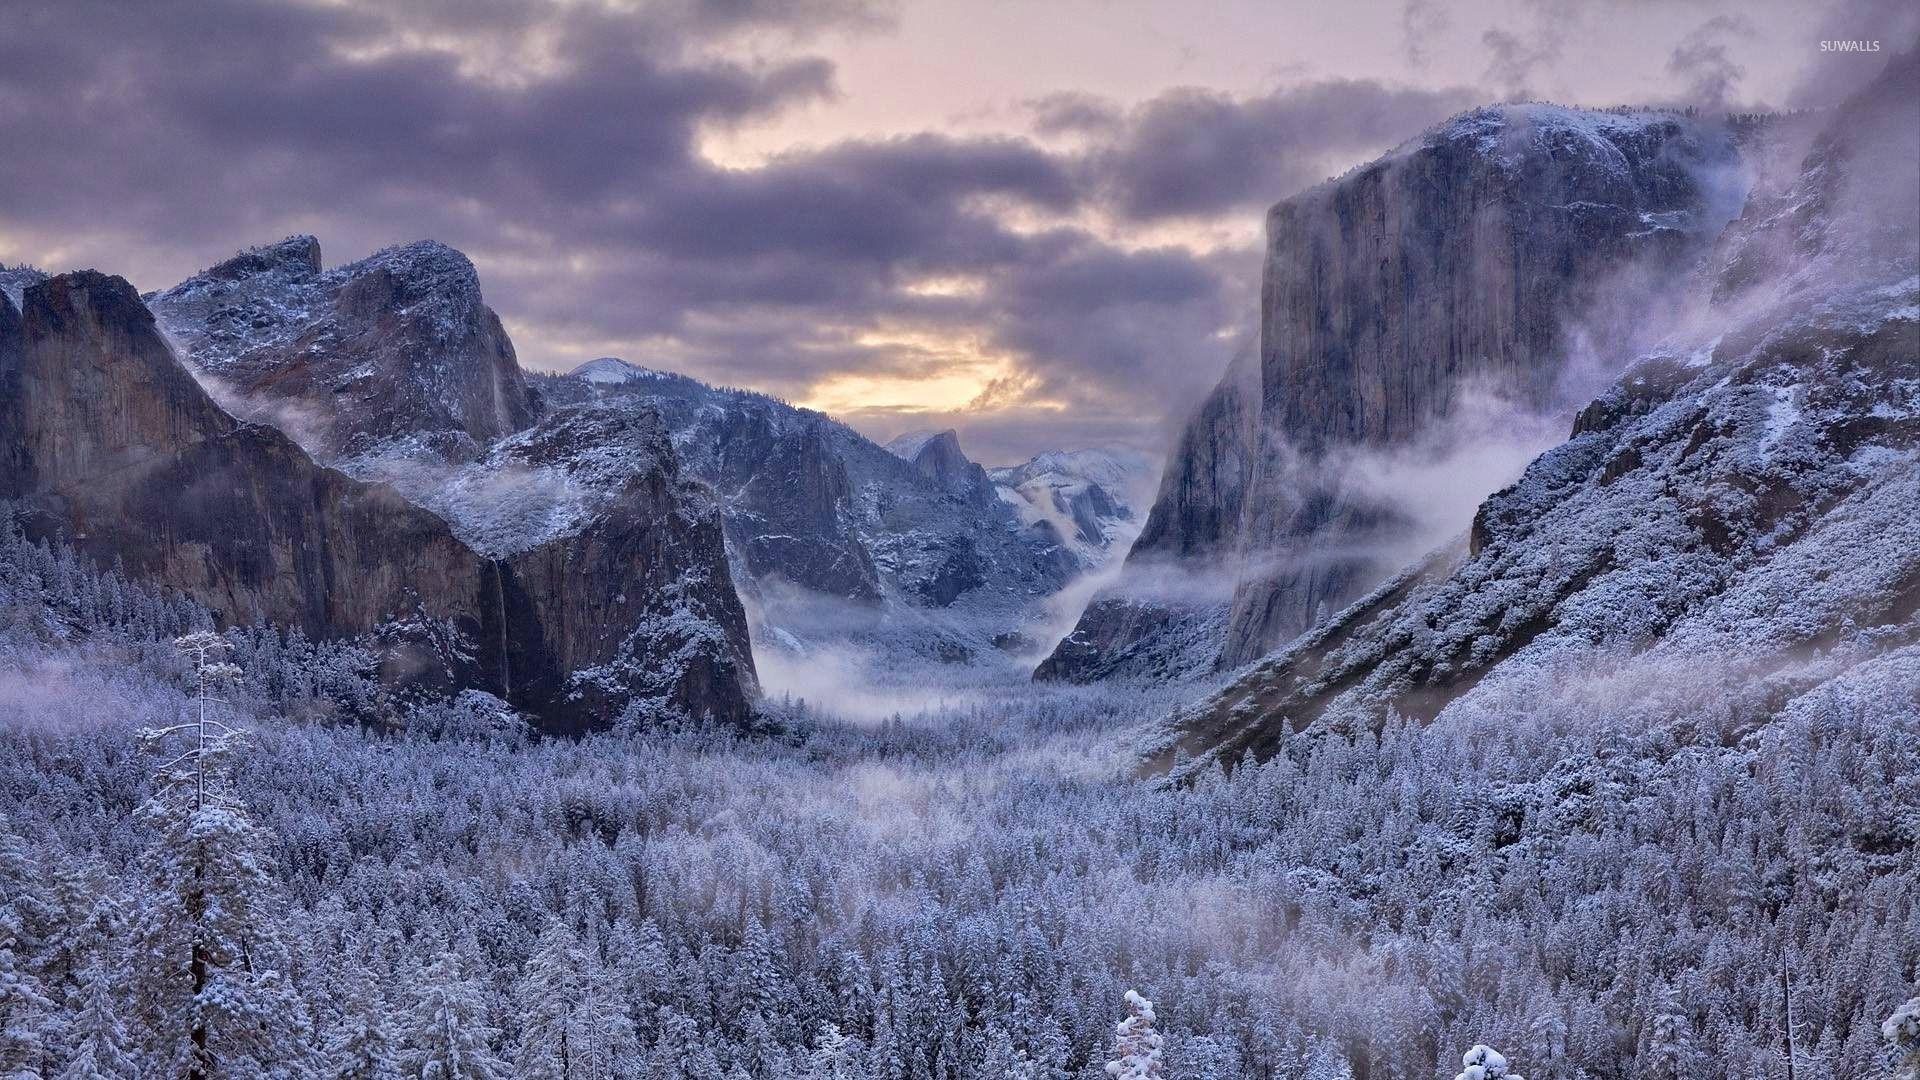 Frosty winter morning in the mountains wallpaper